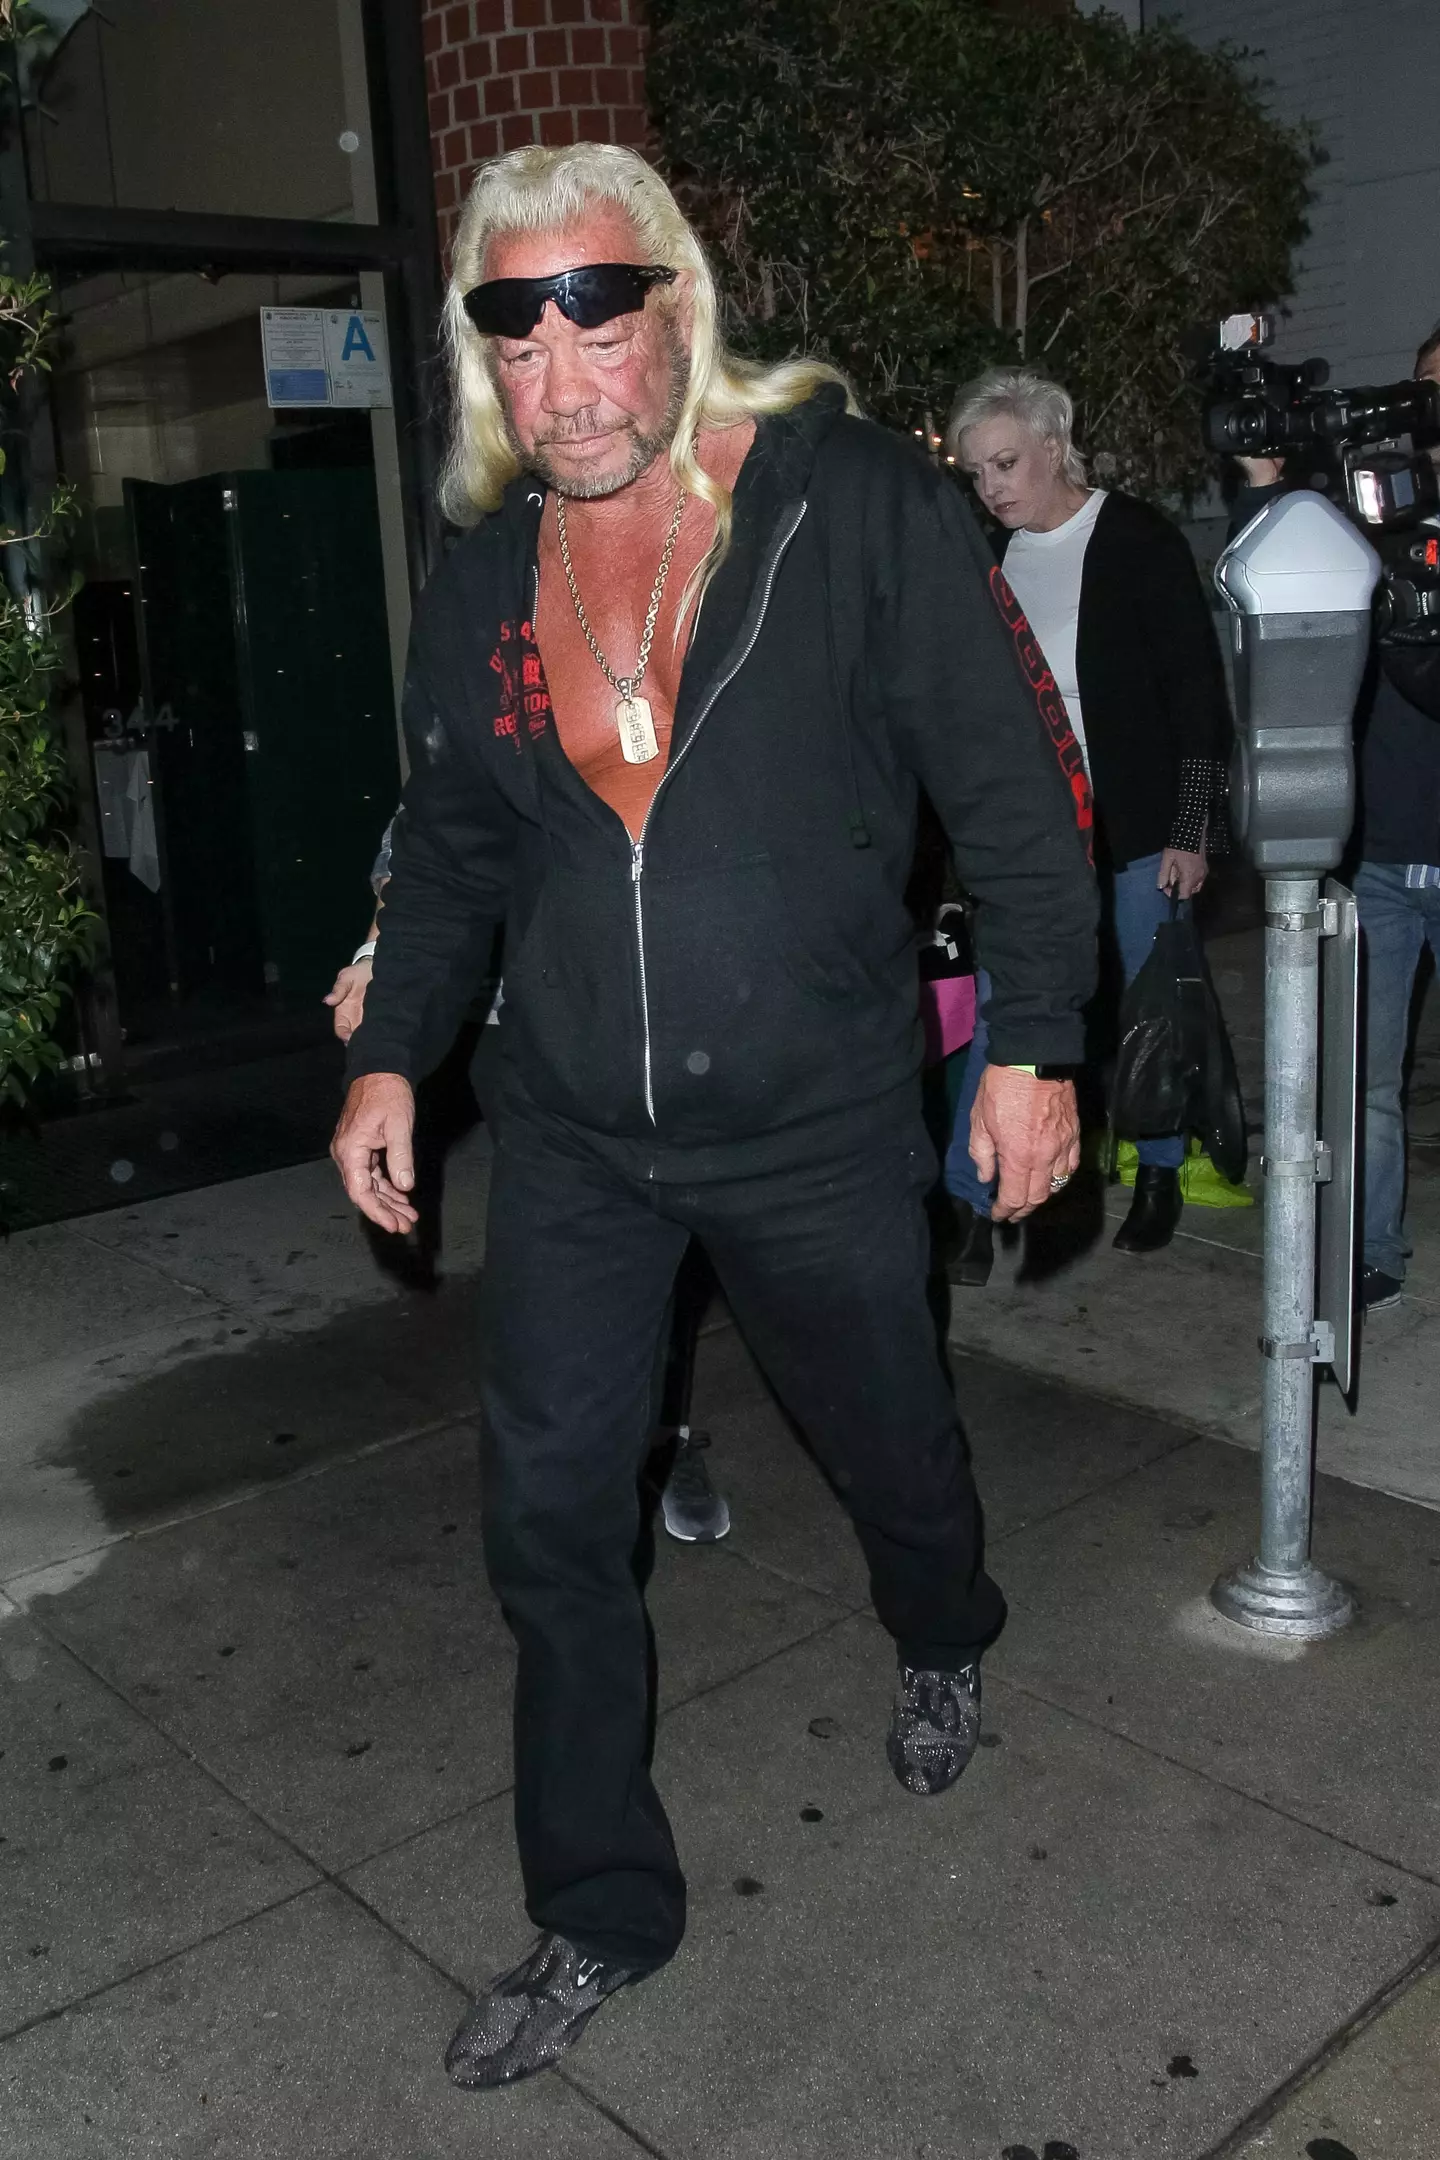 Dog the Bounty Hunter is said to be looking into the Danelo Cavalcante case.